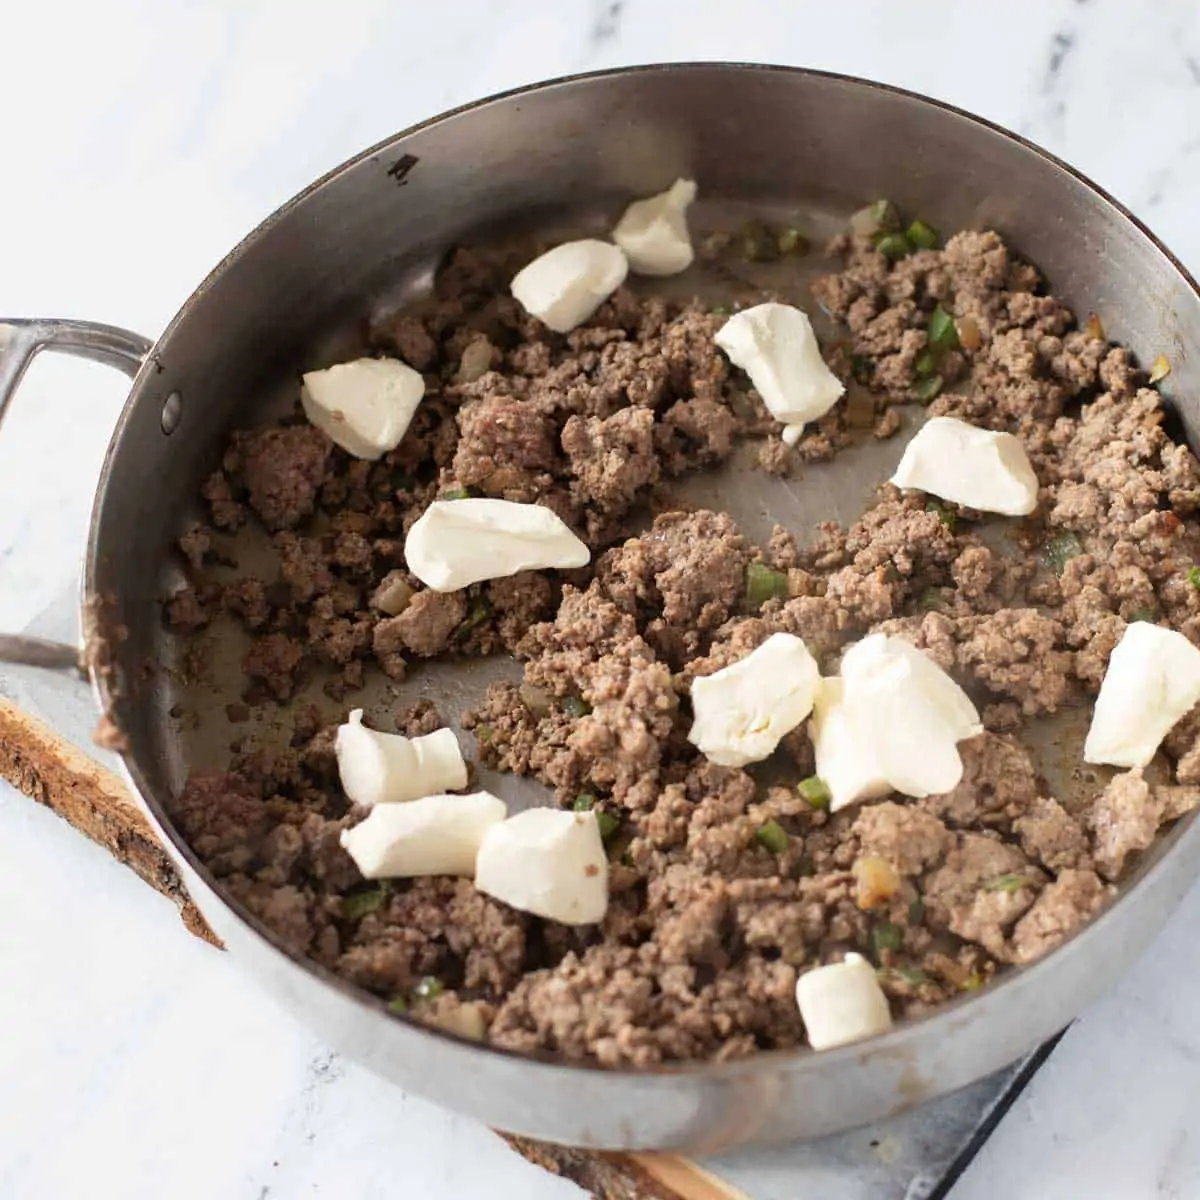 Photo of cream cheese being added to ground beef, onion and jalapeno in a skillet.